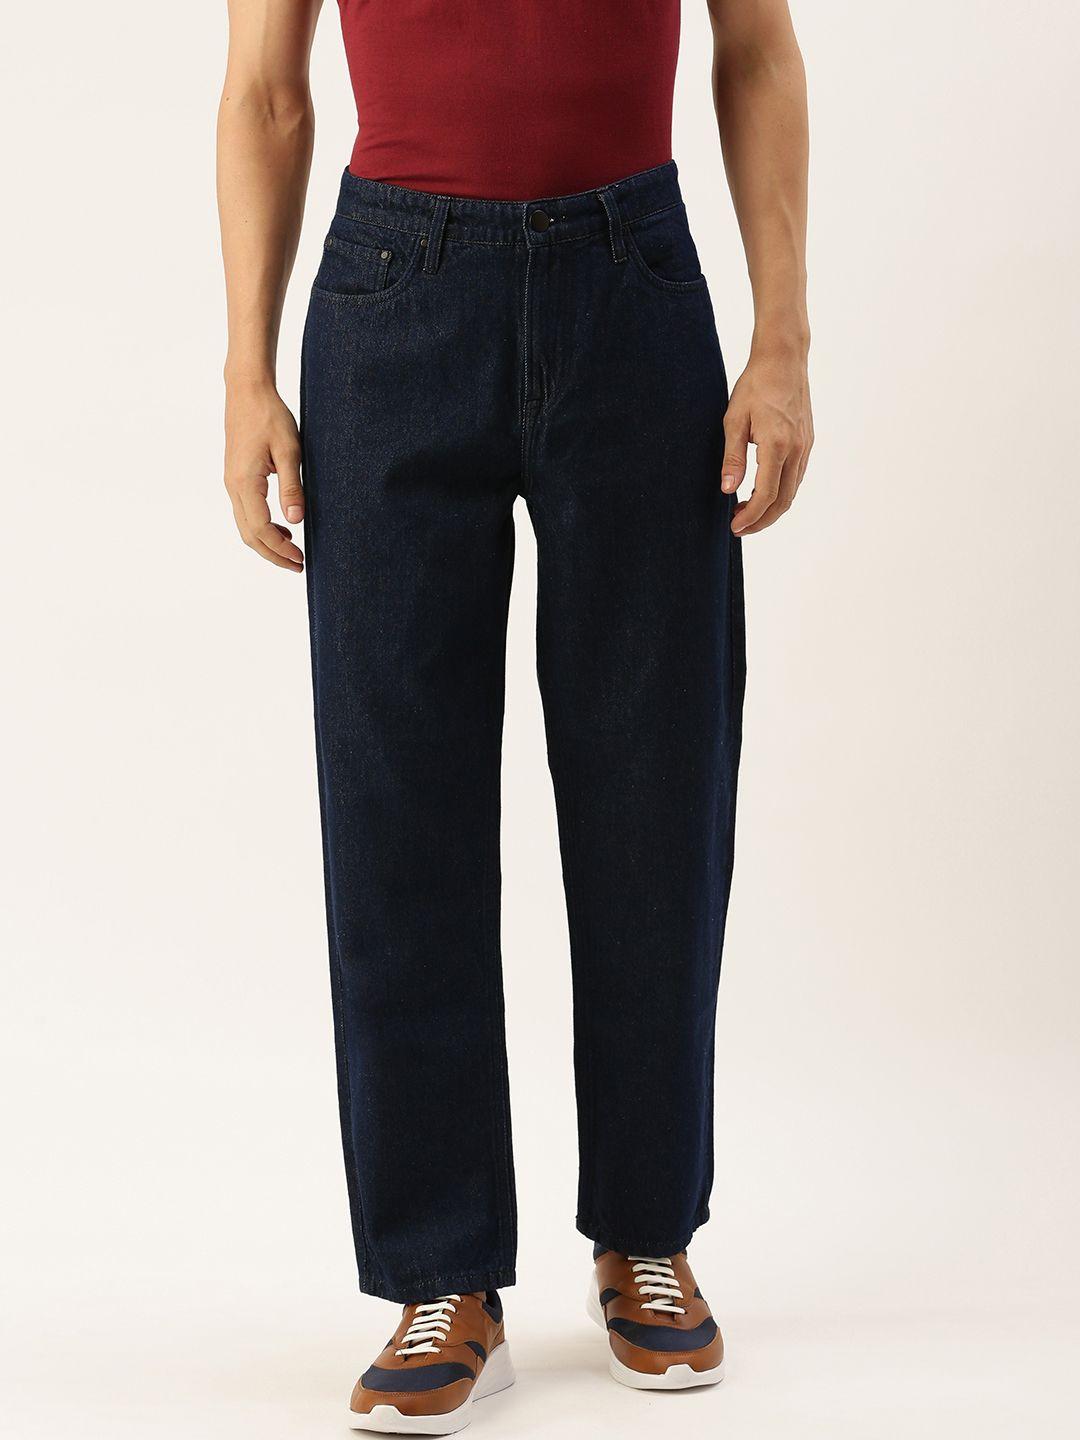 bene kleed men relaxed fit jeans